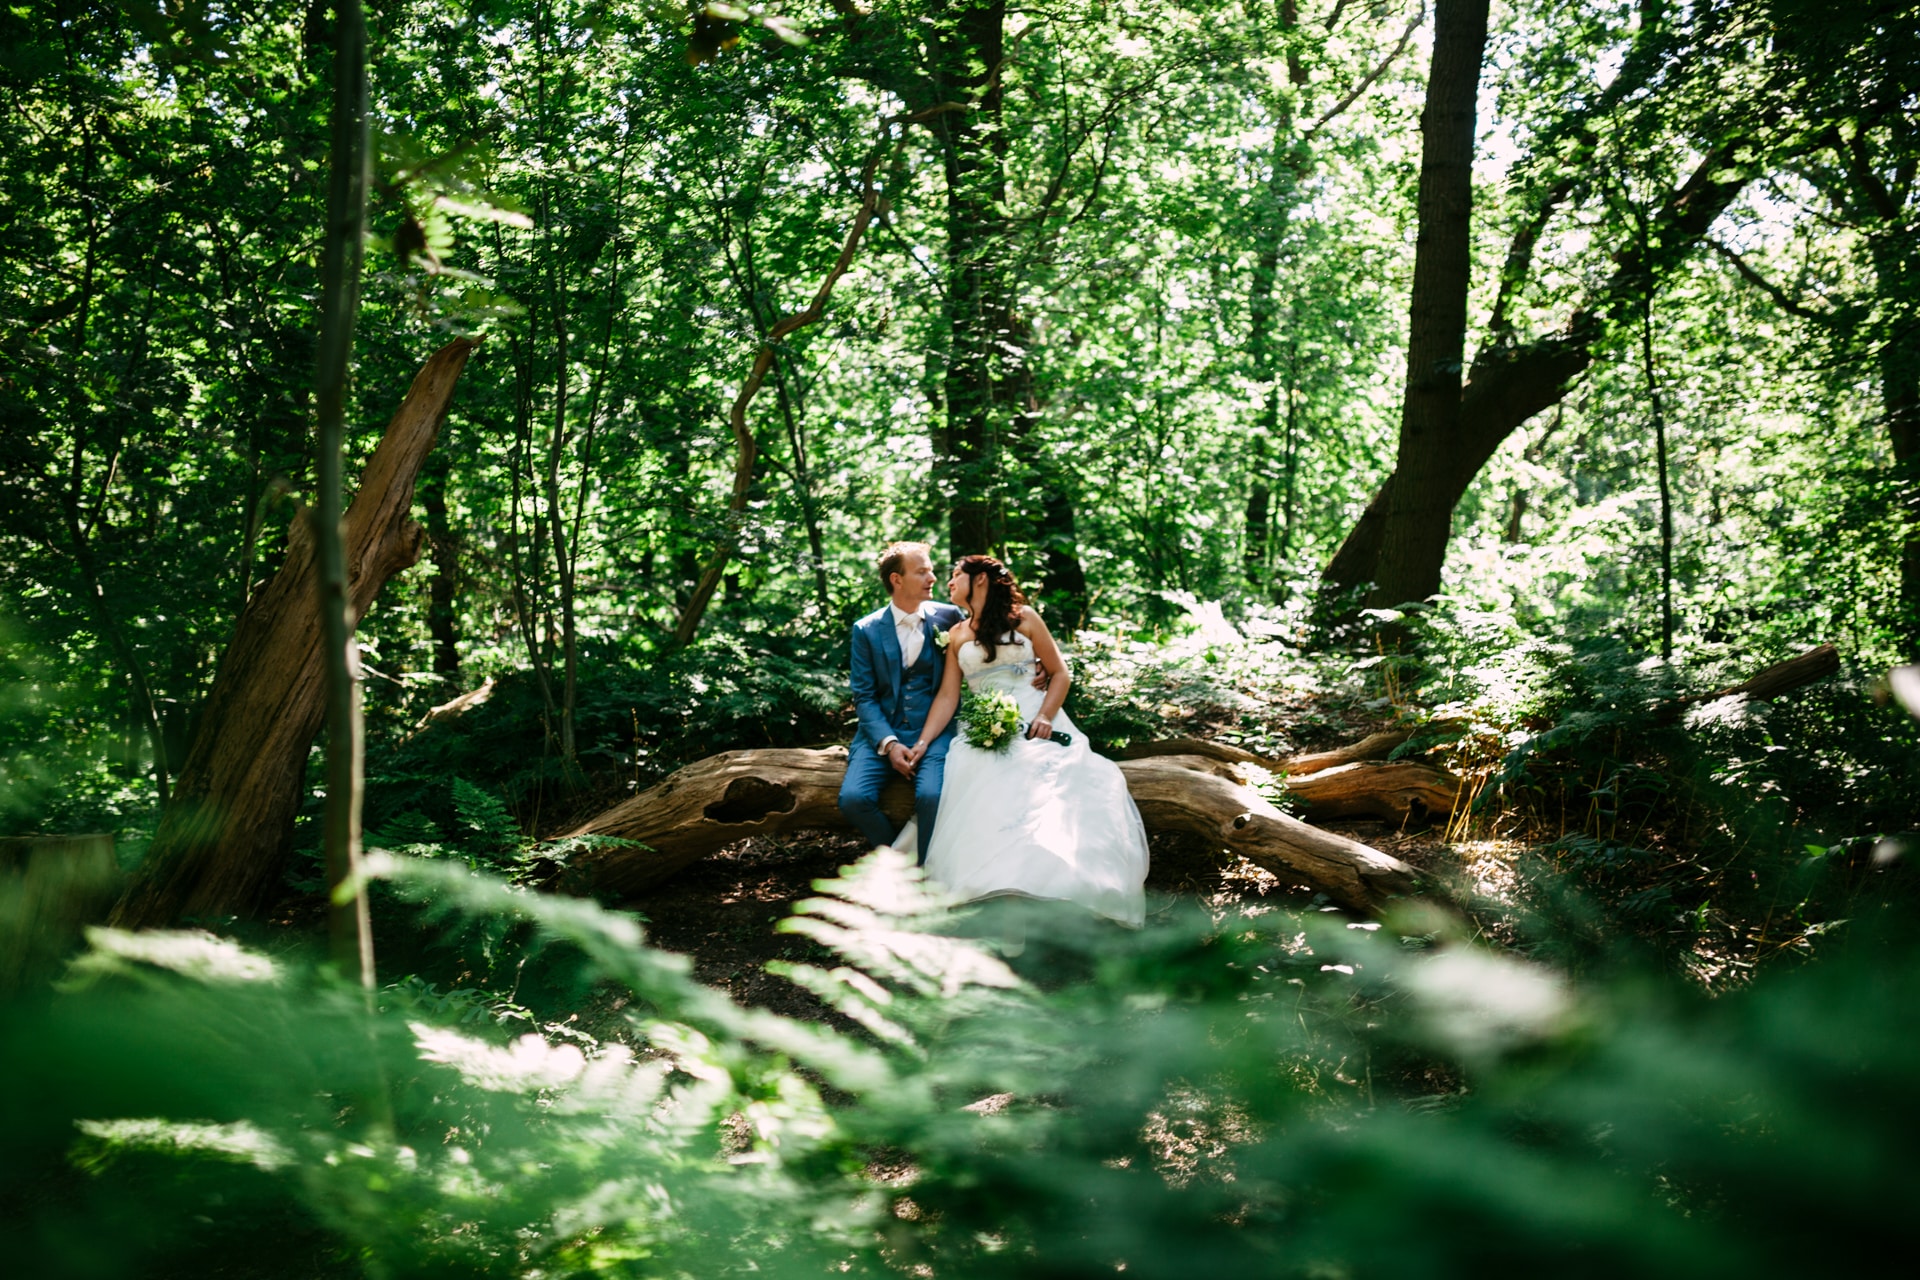 Getting married in the woods - A couple standing in the woods on their wedding day.